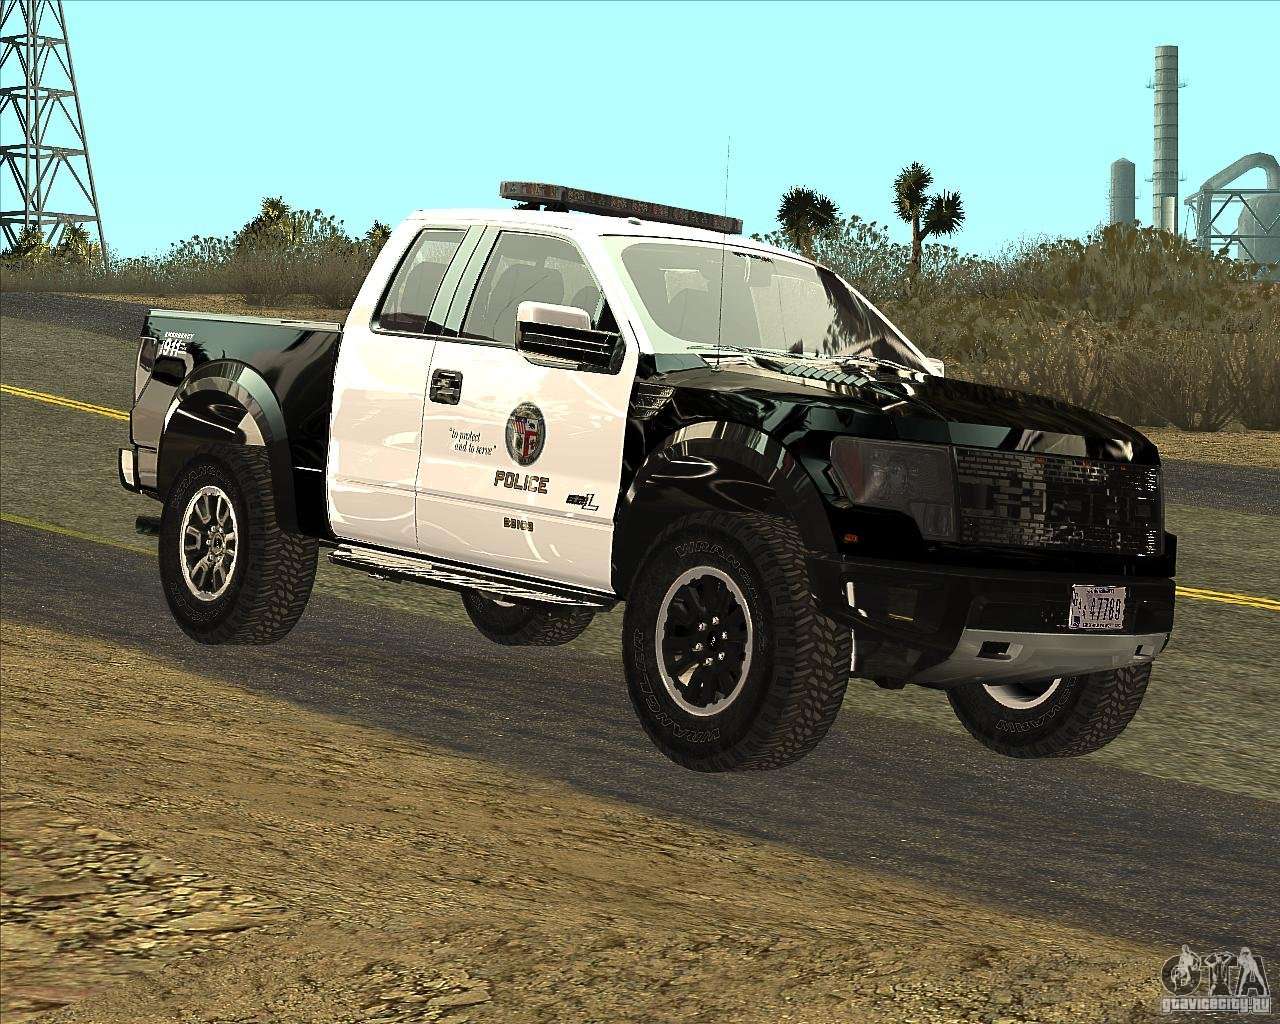 Ford ranger forum forums for ford ranger enthusiasts! Ford ranger ...